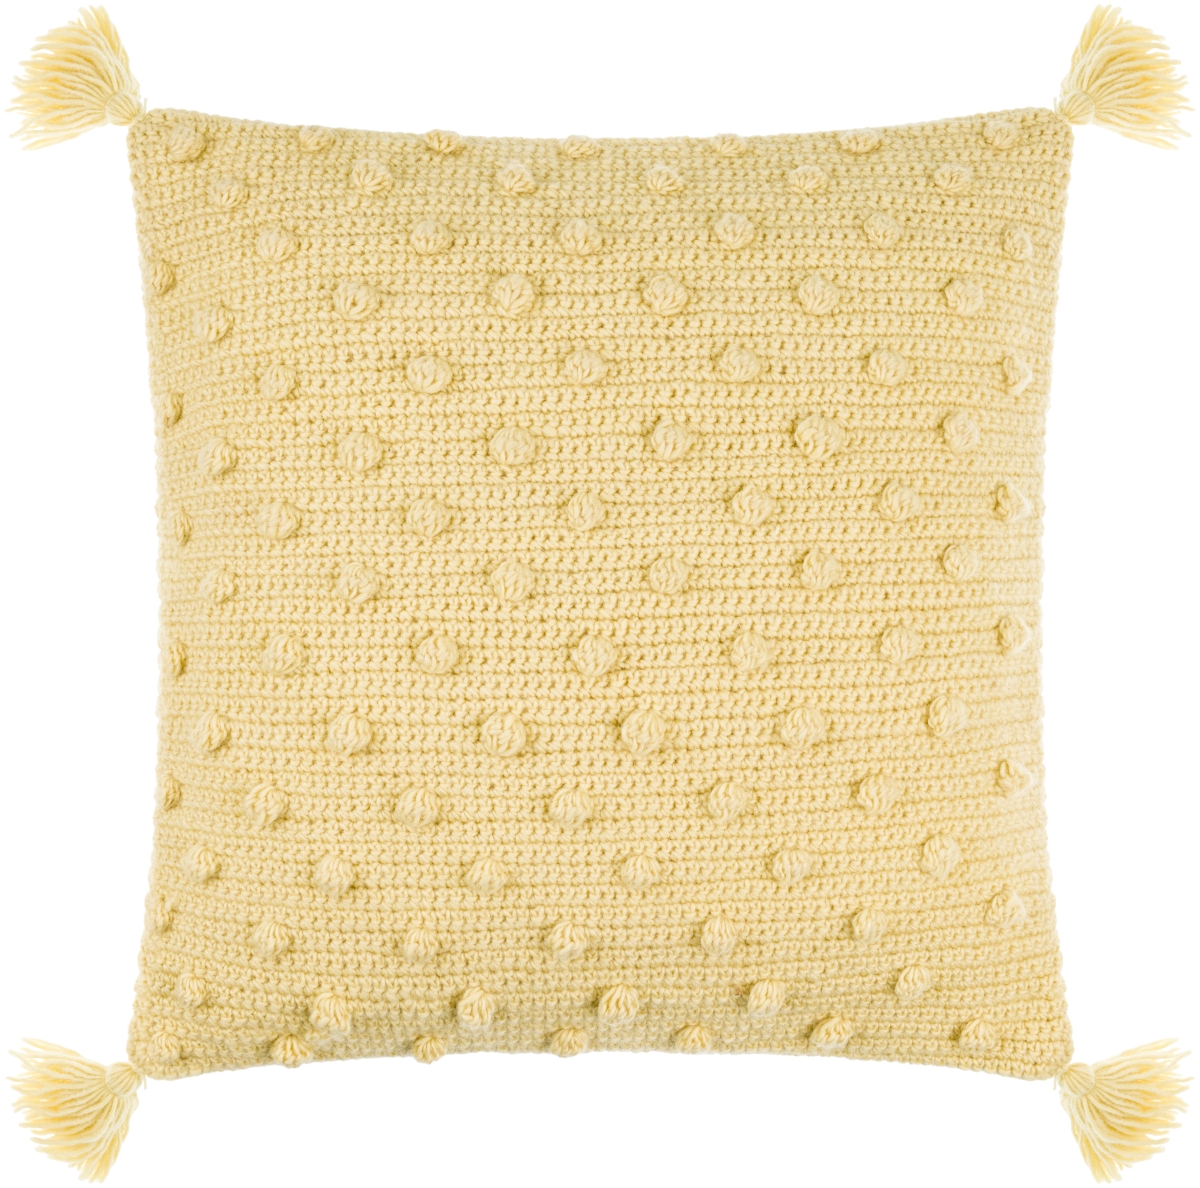 Picture of Livabliss MKO013-1818 18 x 18 in. Makrome Square Pillow Cover